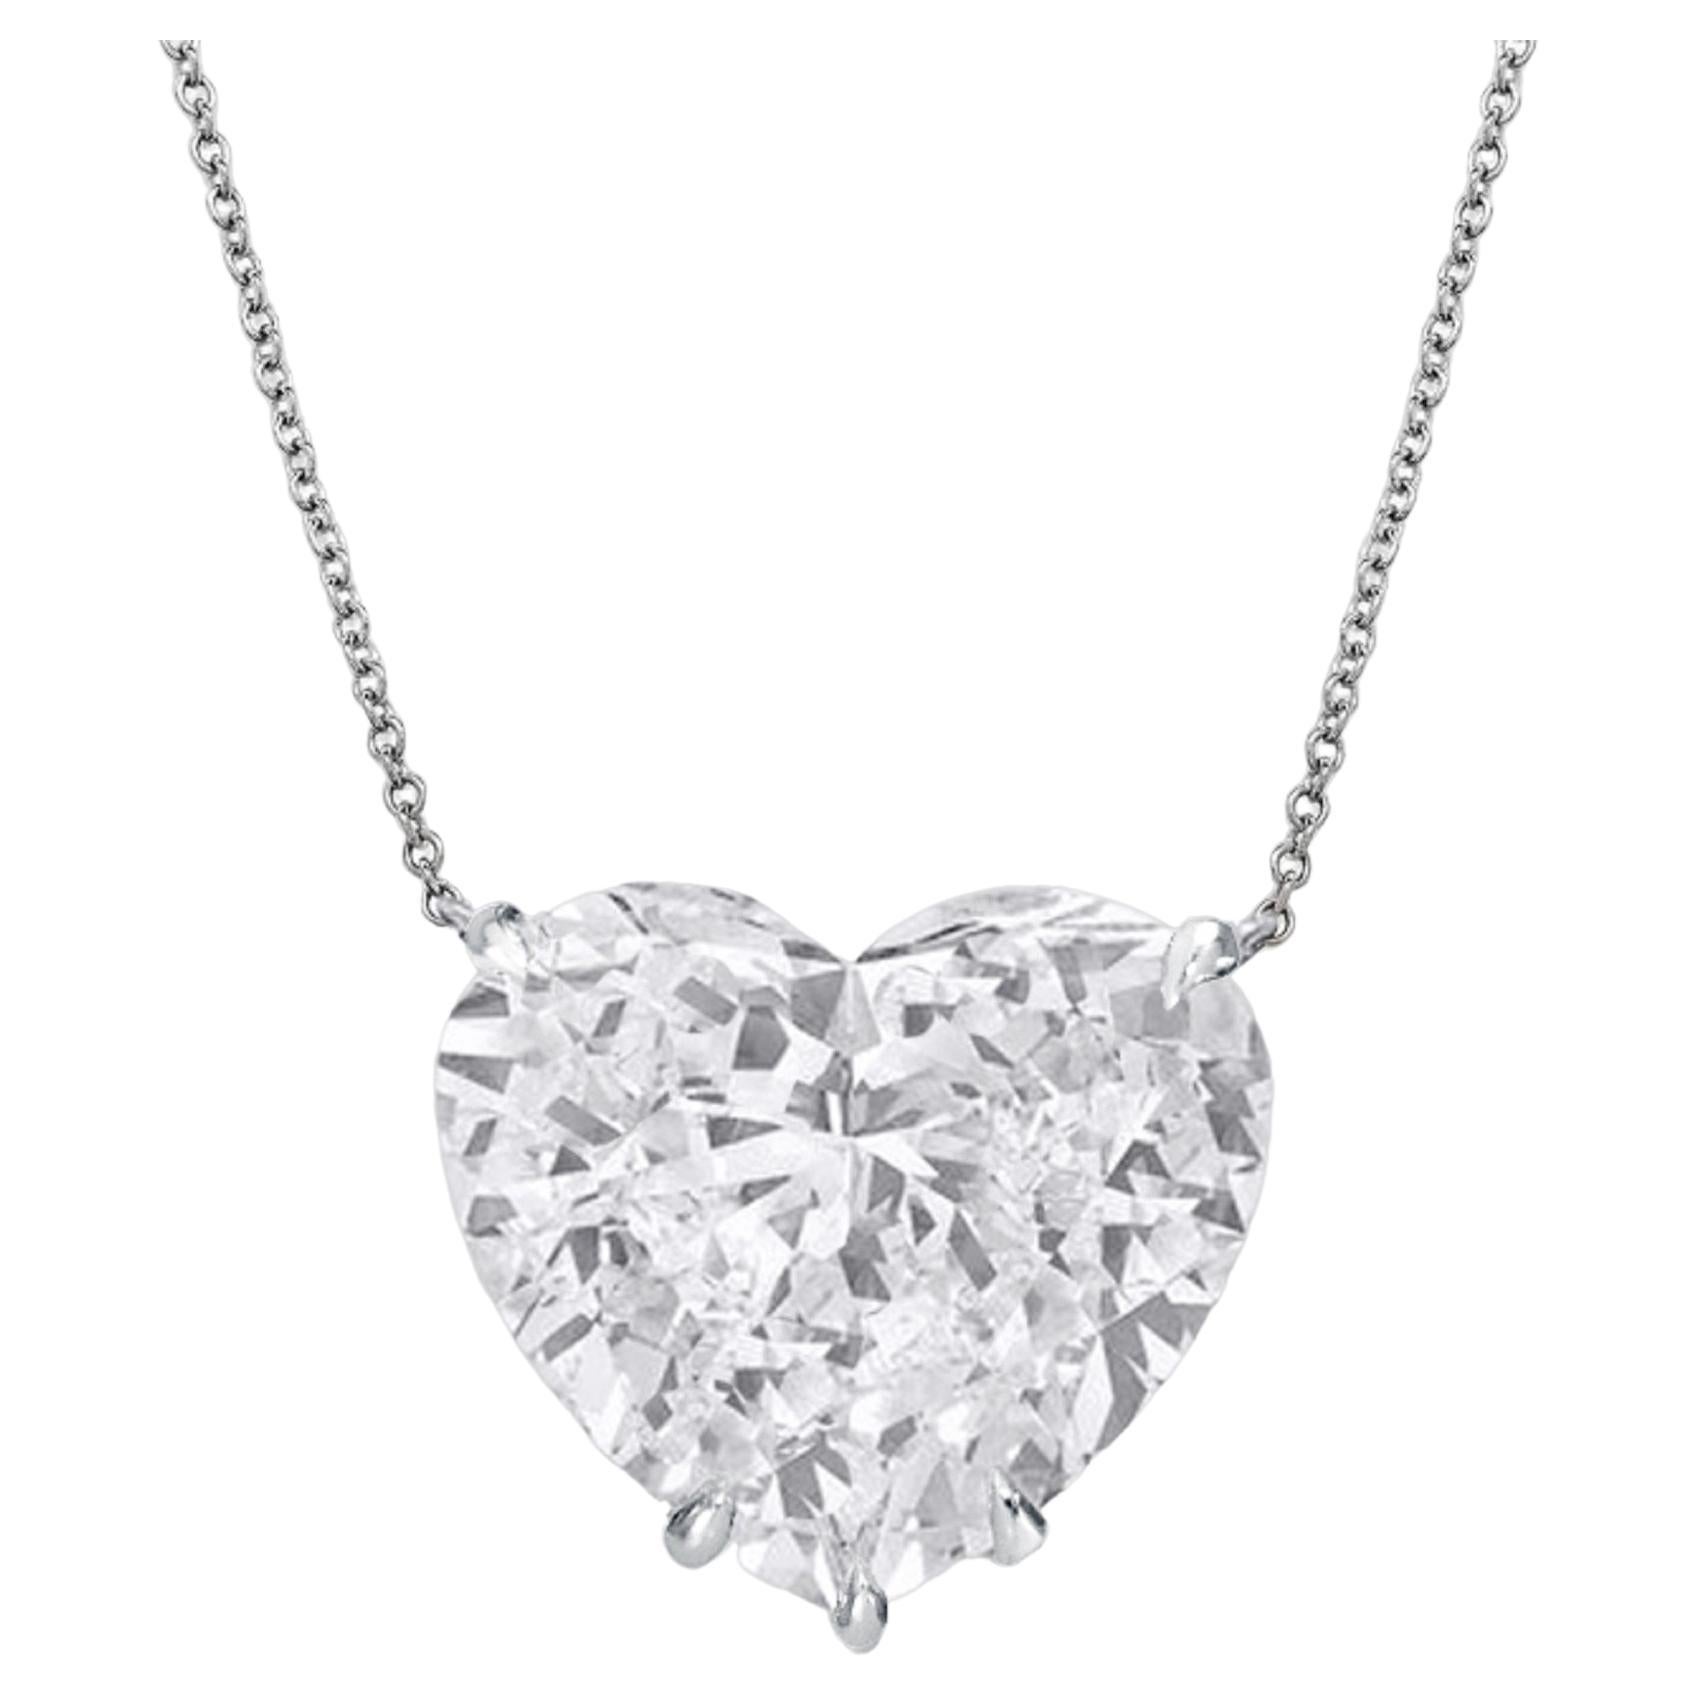 GIA Certified 4 Carat Heart Shape Diamond Platinum Necklace
D COLOR
INTERNALLY FLAWLESS
INVESTMENT GRADE